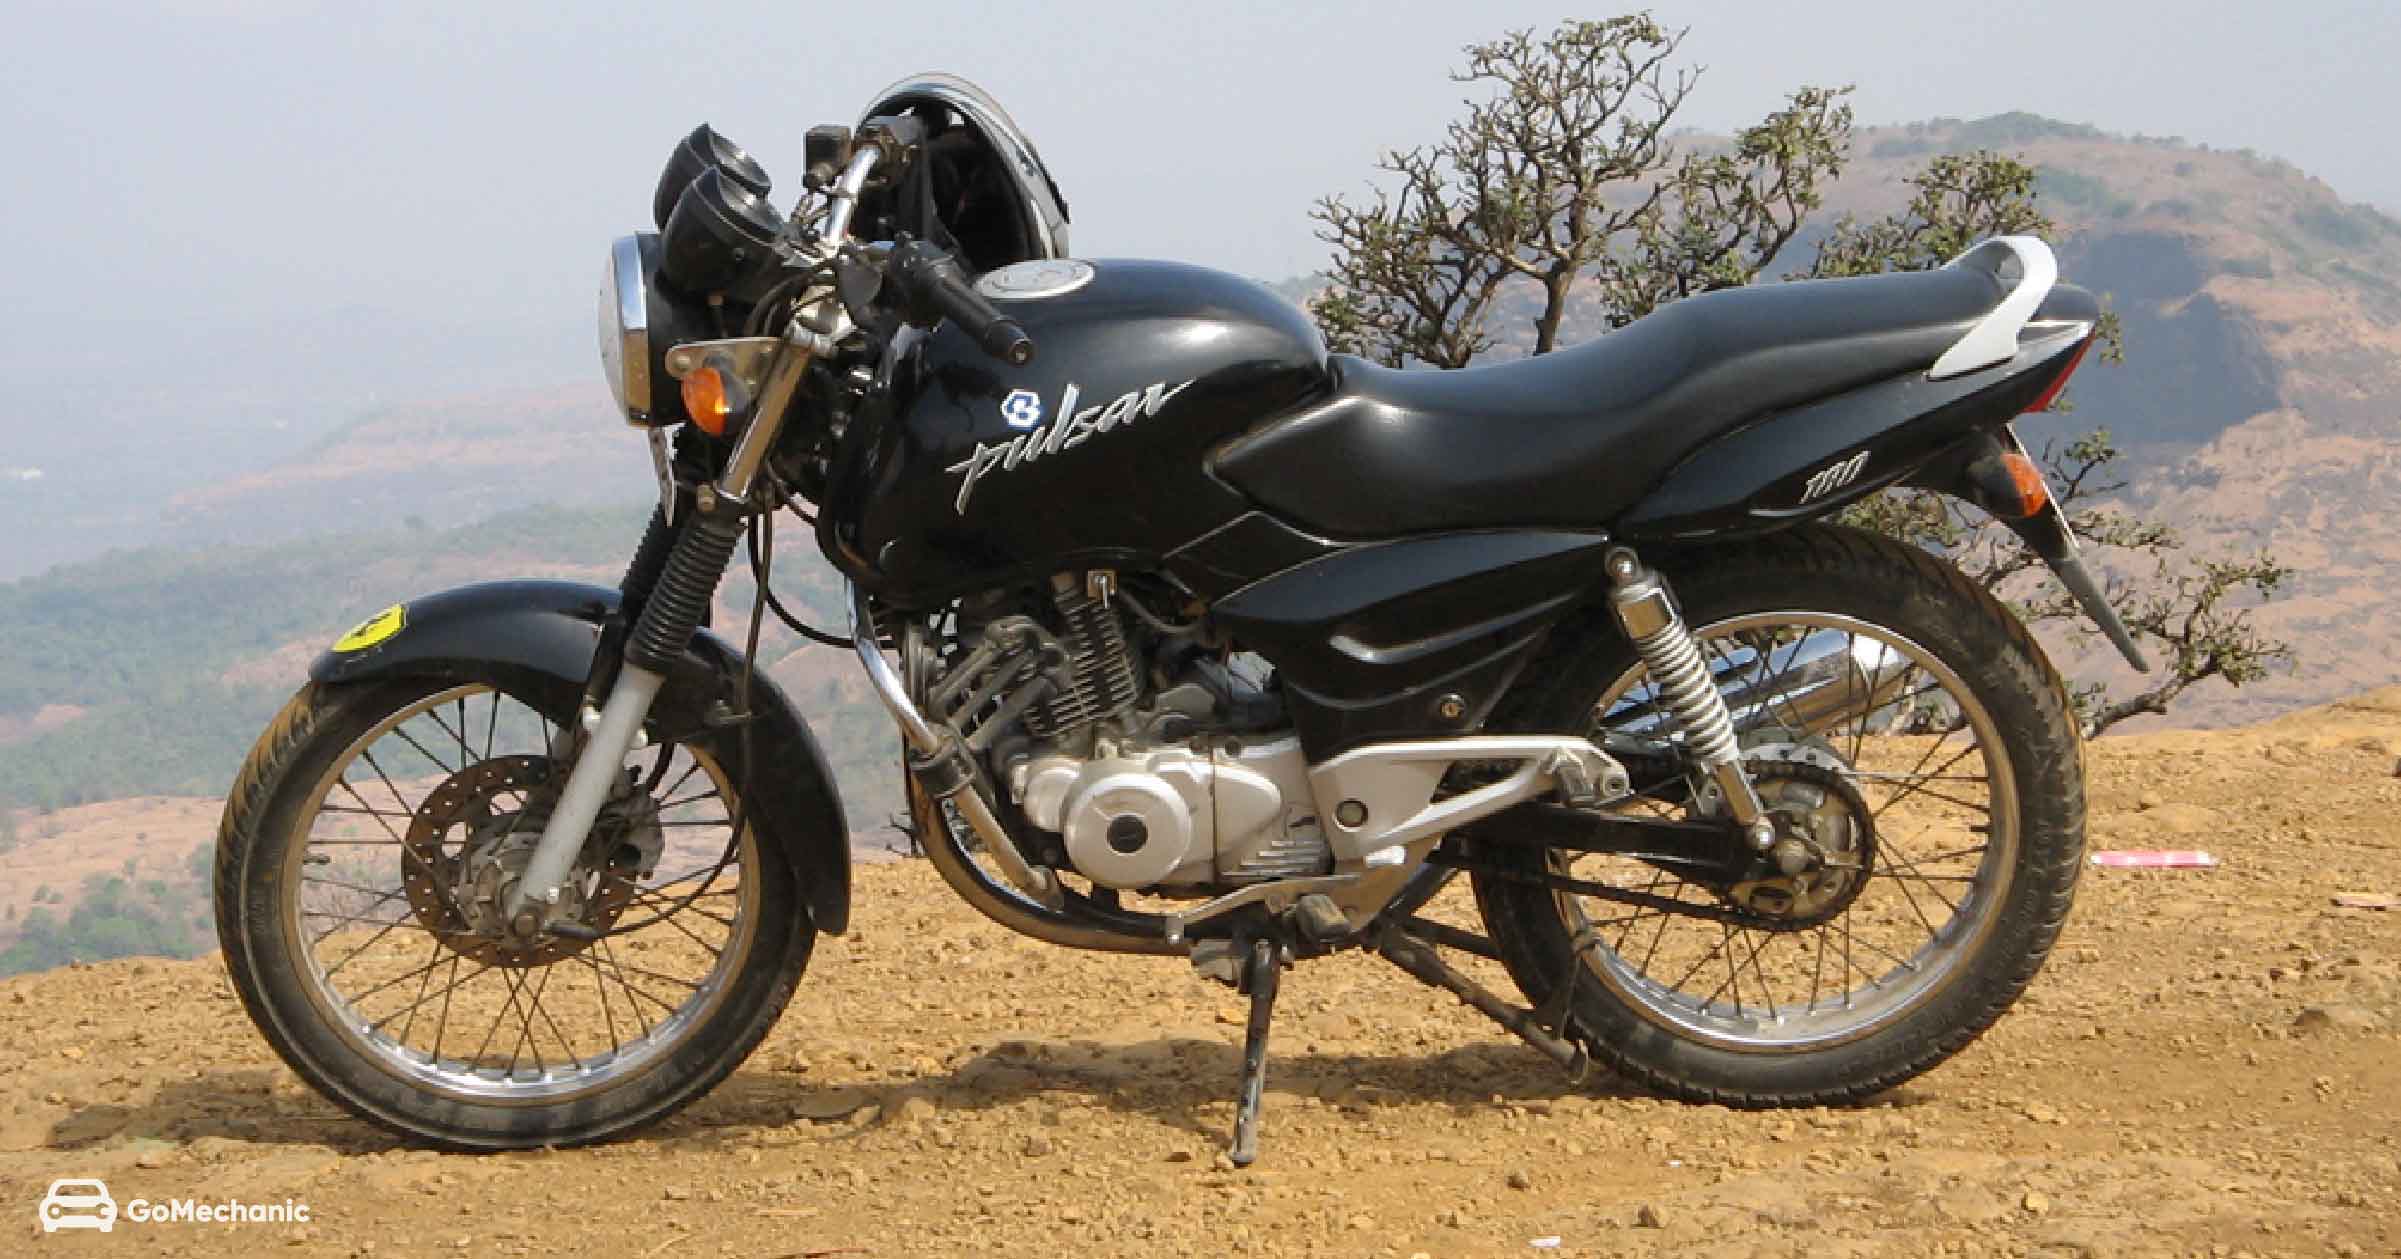 Bajaj Pulsar The History Of The Fastest Indian